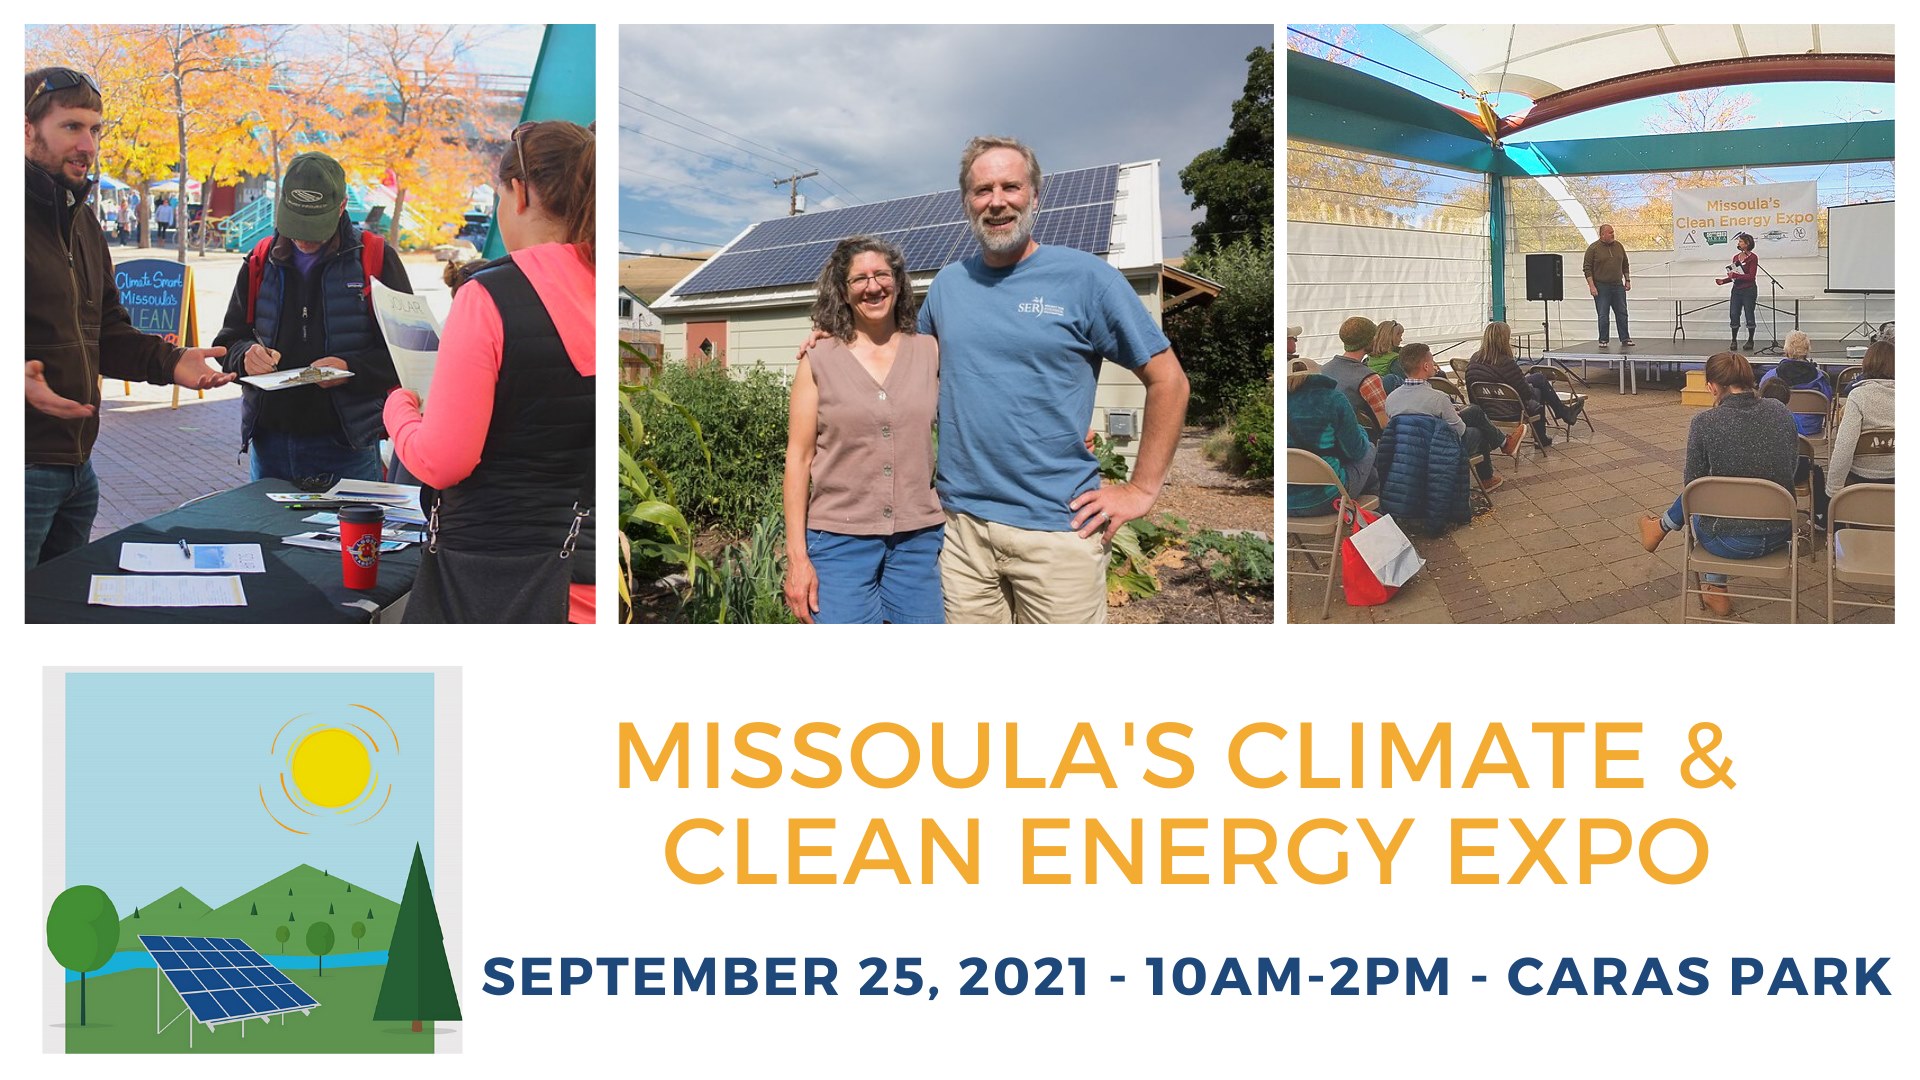 Missoula's Climate & Clean Energy Expo